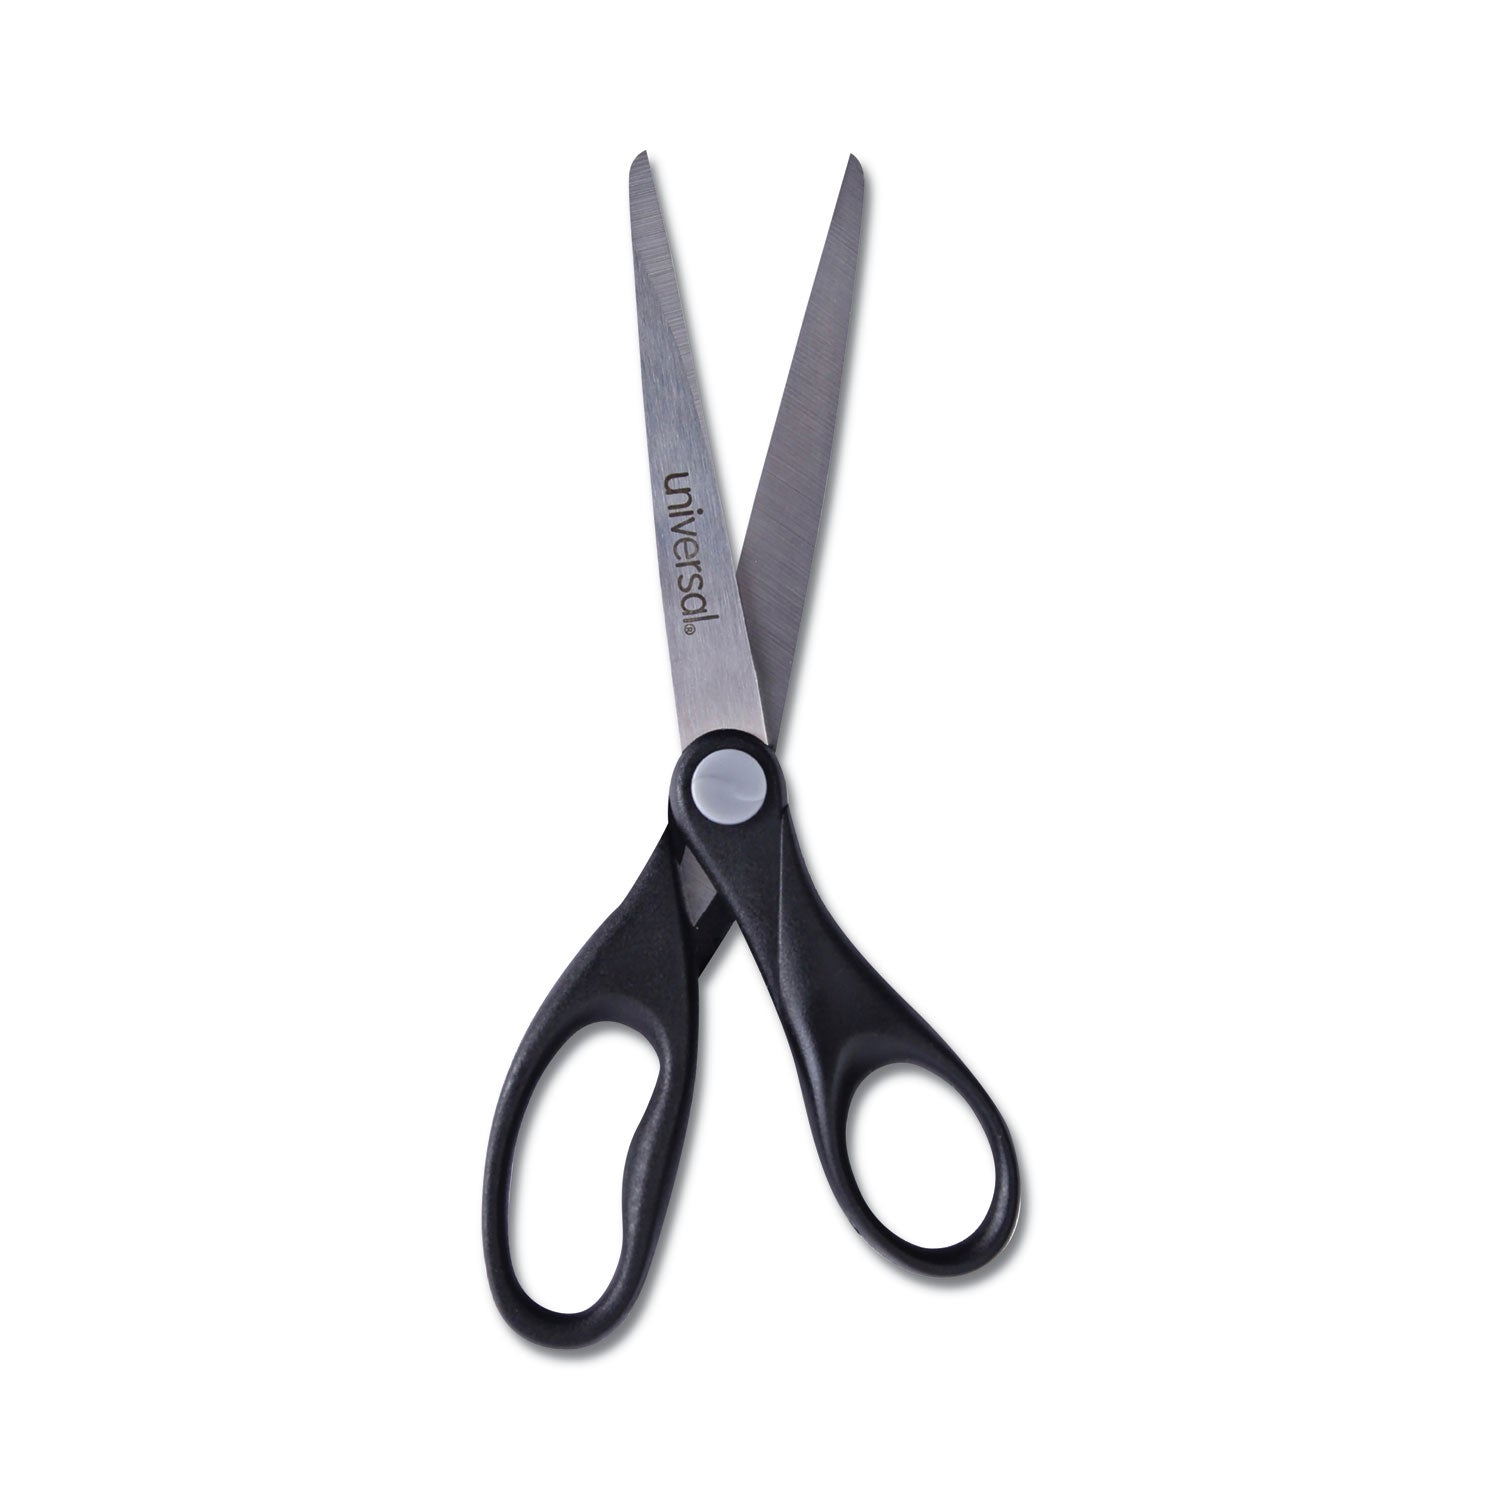 Stainless Steel Office Scissors, Pointed Tip, 7" Long, 3" Cut Length, Black Straight Handle - 